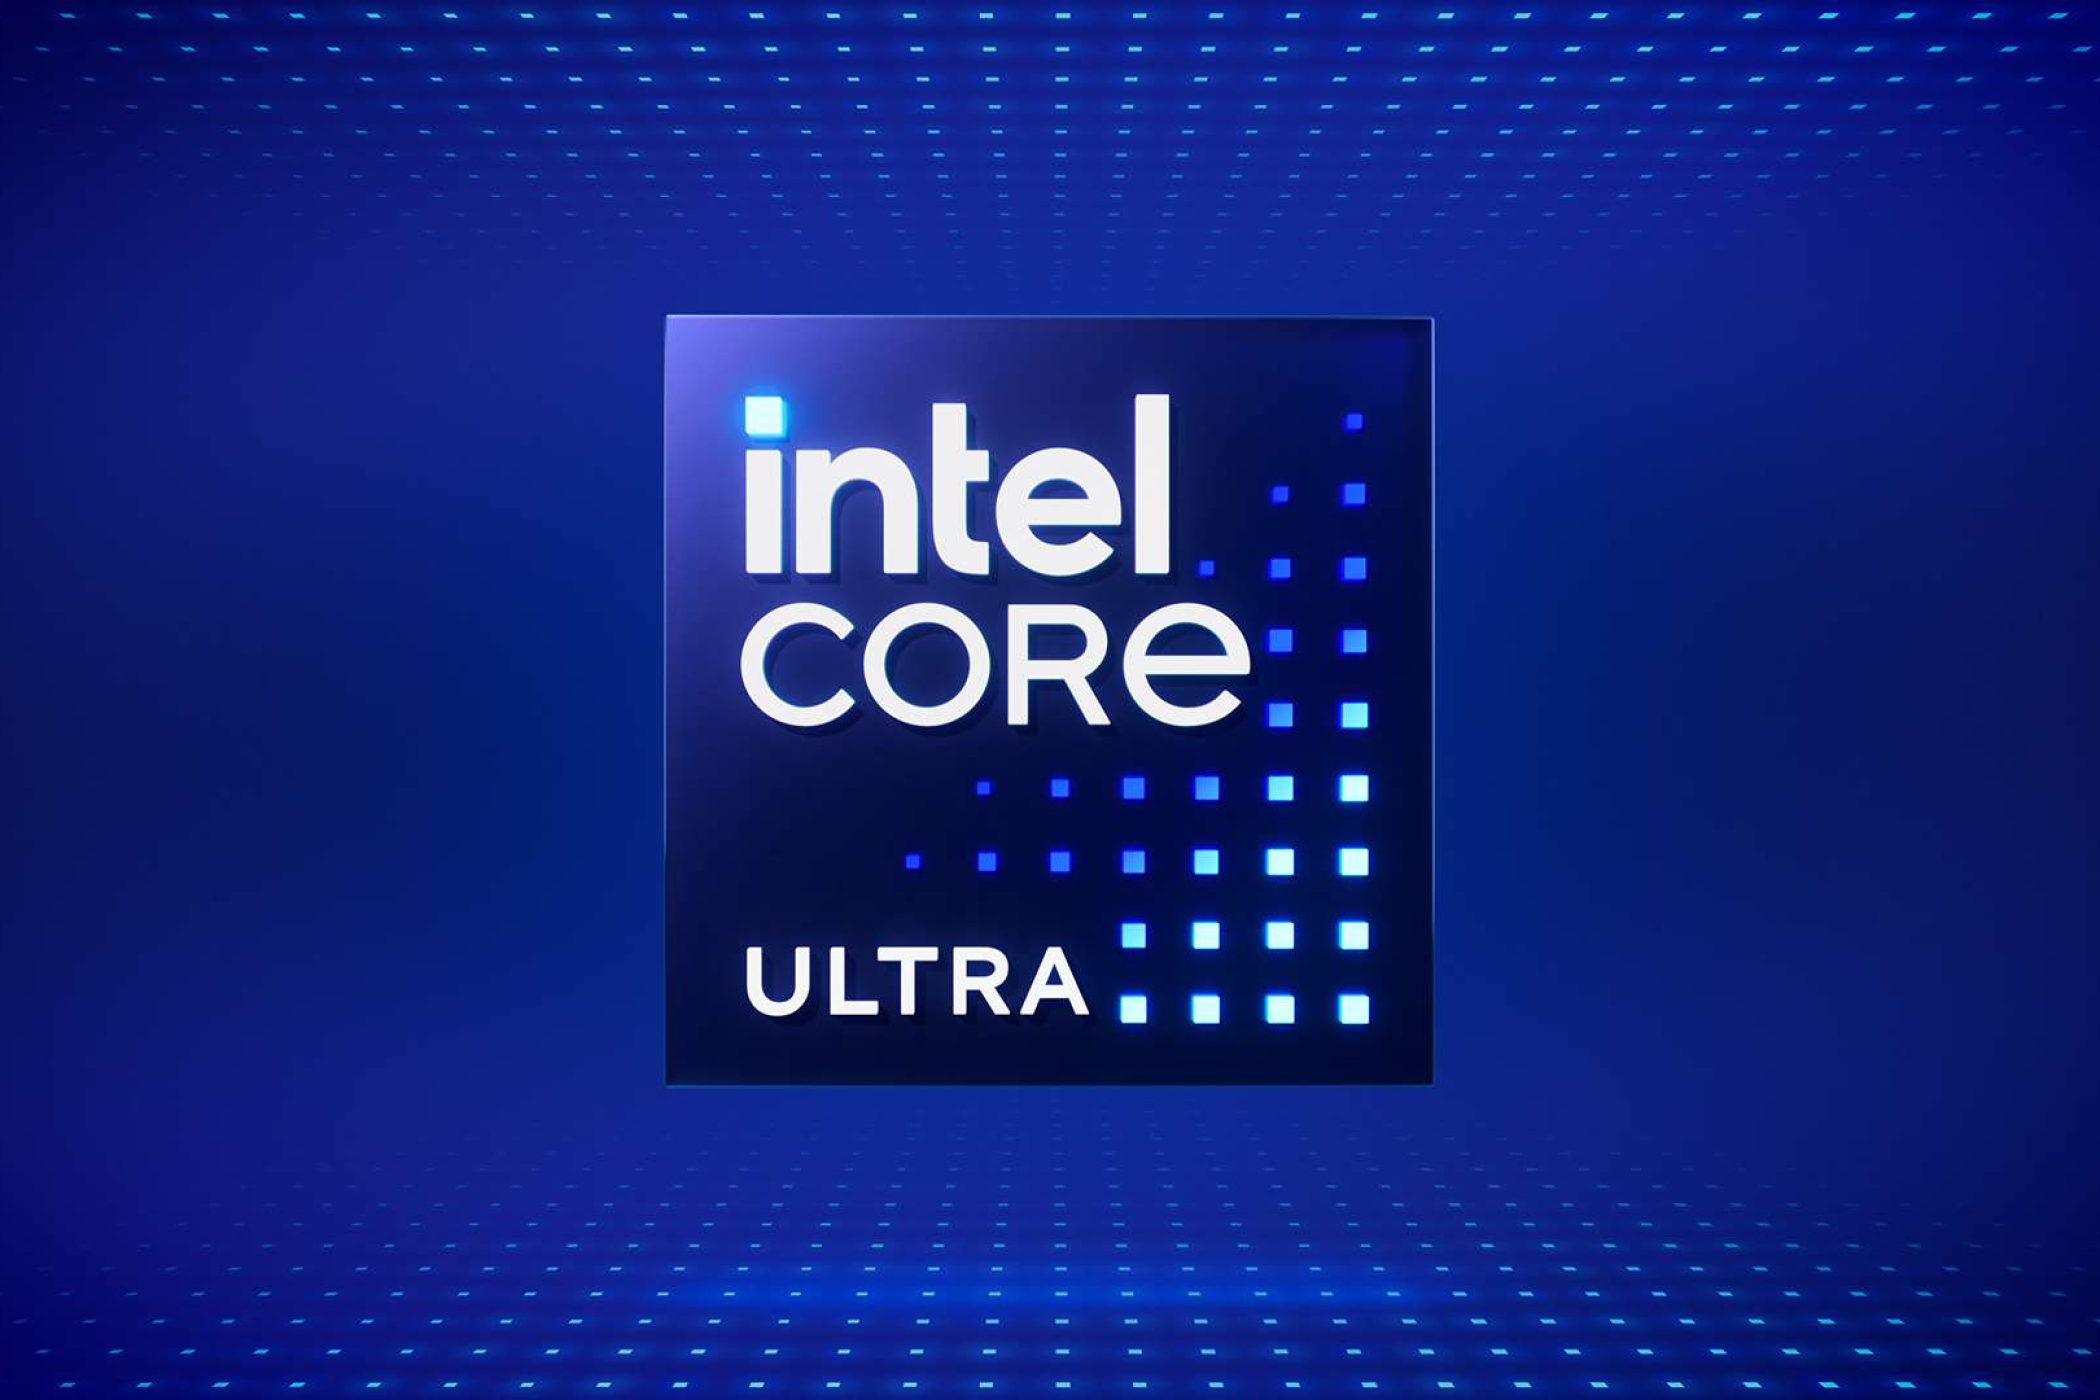 No, Intel is not ditching its Extreme Edition branding for high-end CPUs